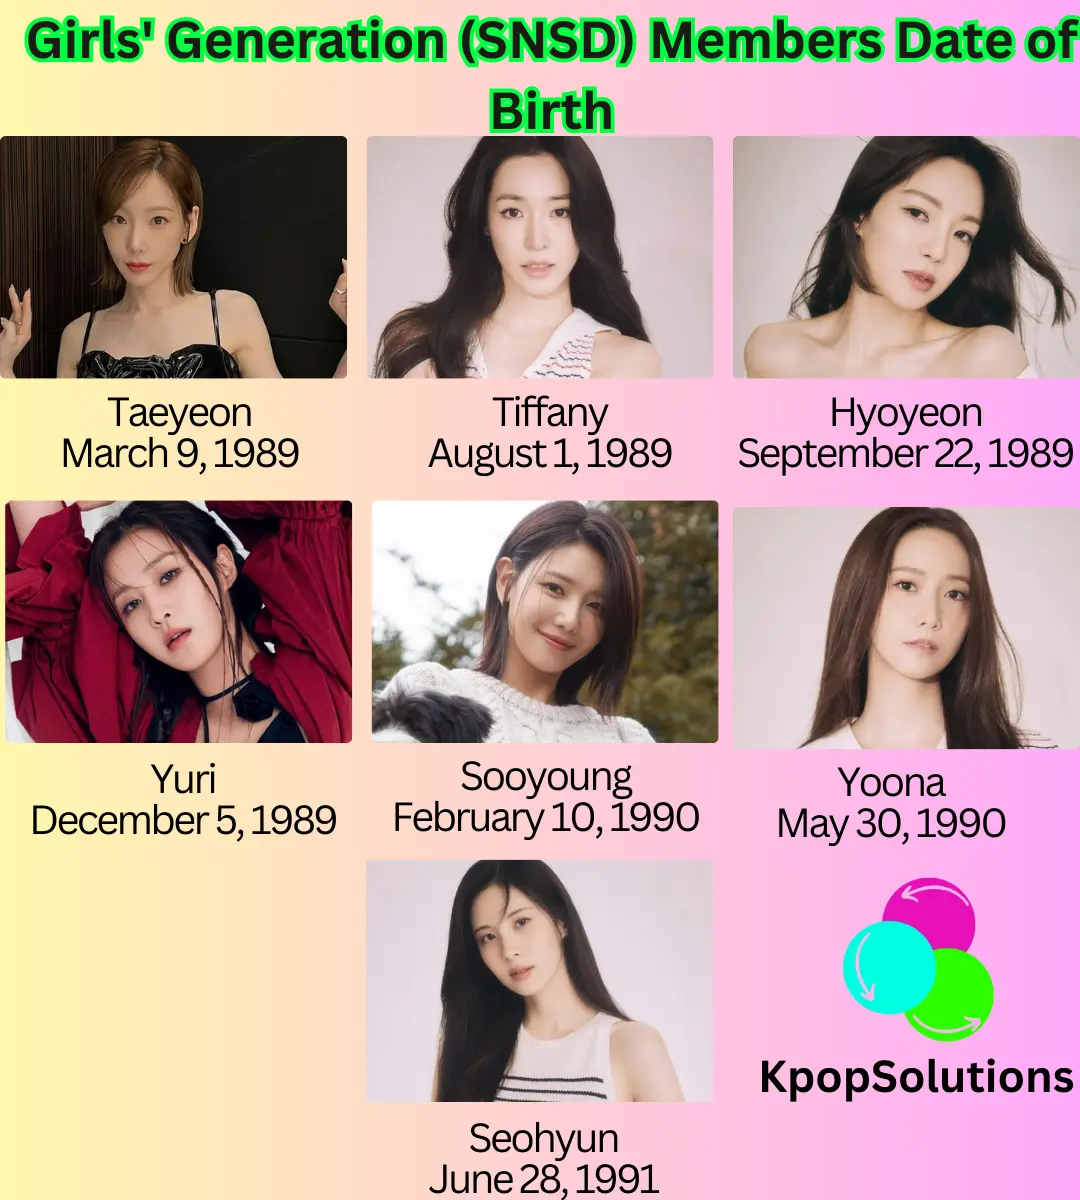 Girls' Generation (SNSD) members: Taeyeon, Tiffany, Hyoyeon, Yuri, Sooyoung, Yoona, and Seohyun date of birth and current ages in order.